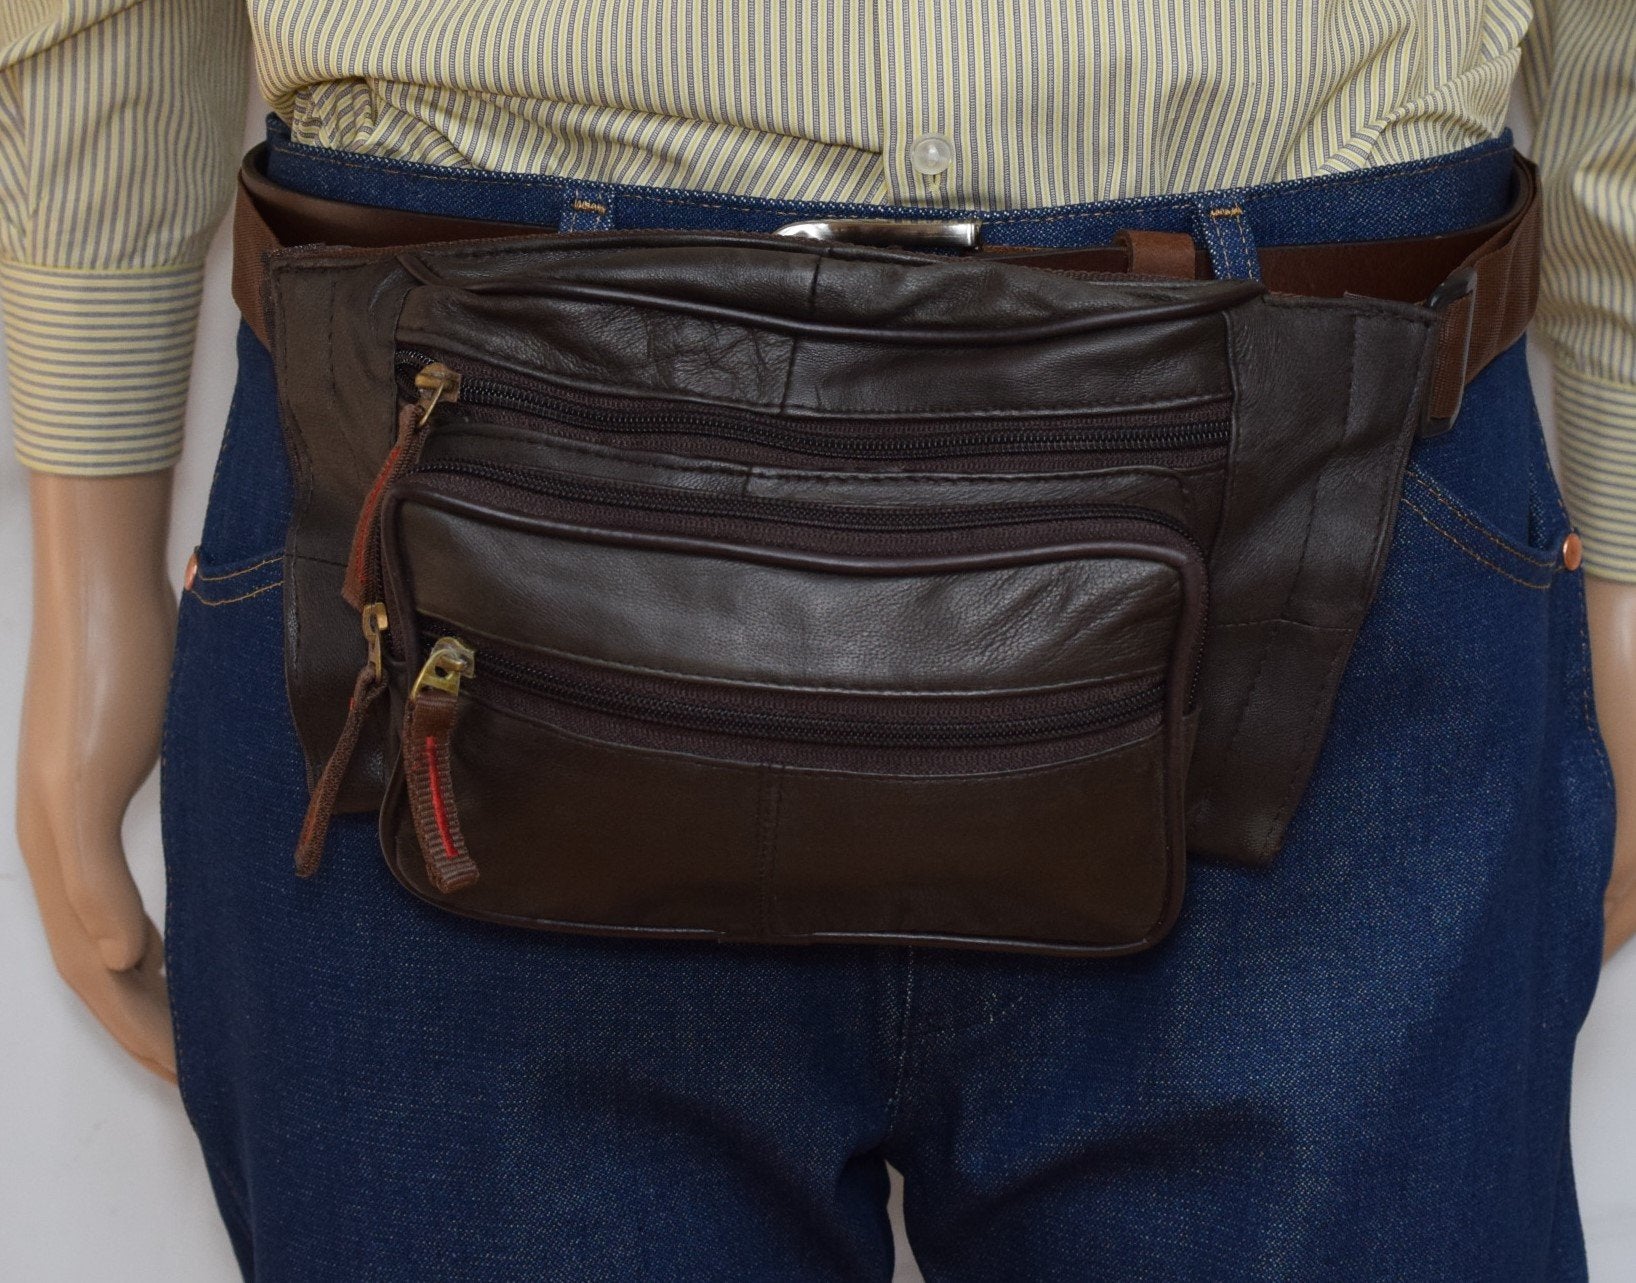 Genuine Leather Concealed Carry Pistol Pouch Ultimate Fanny Pack